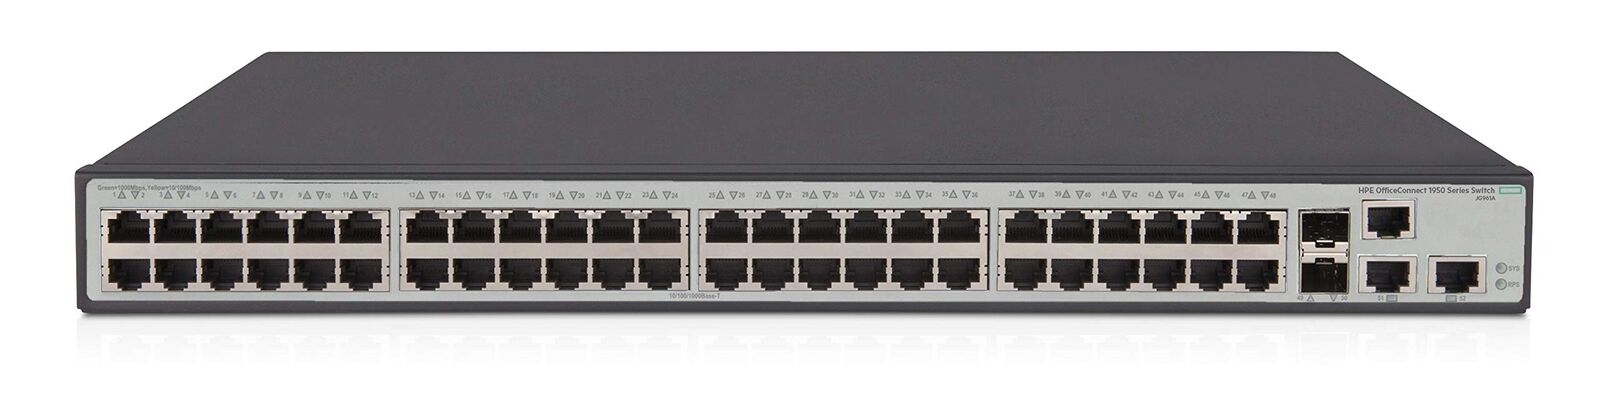 HPE OfficeConnect 1950 48-Port Gig Smart Switch-48xGE|2xSFP+|2x10GBASE-T